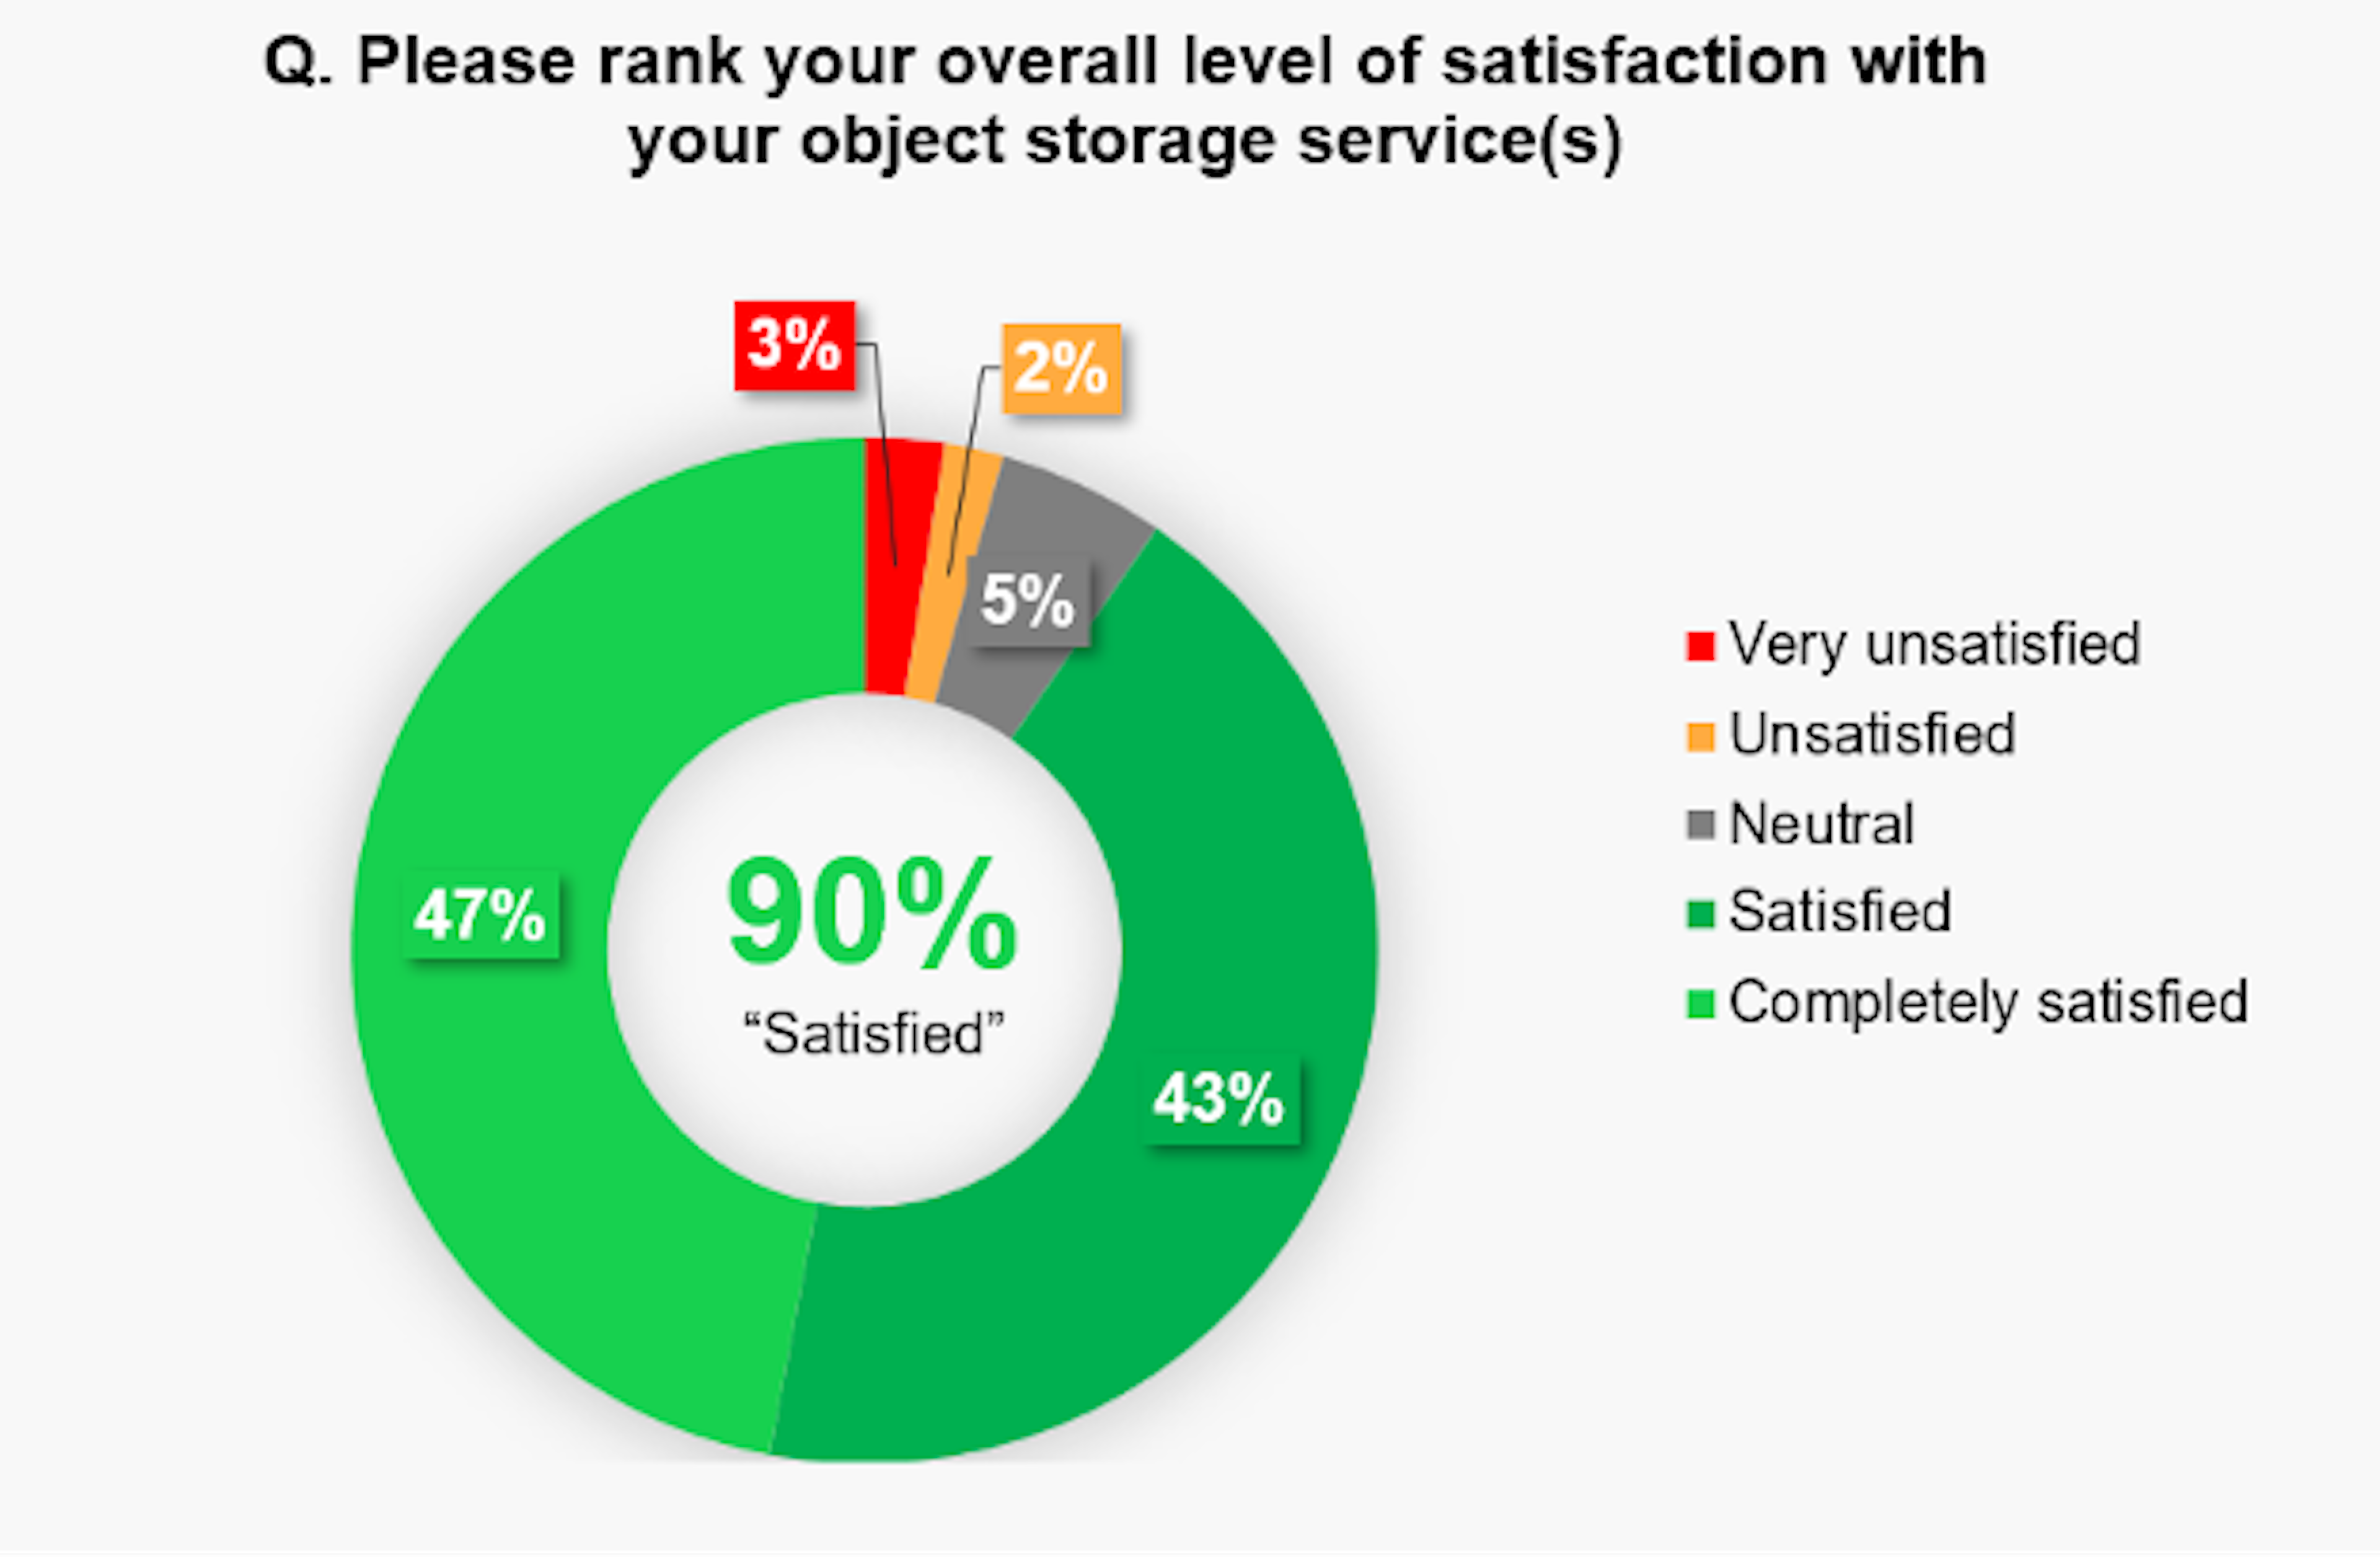 pie chart showing 90% of people are satisfied or completely satisfied with the object storage